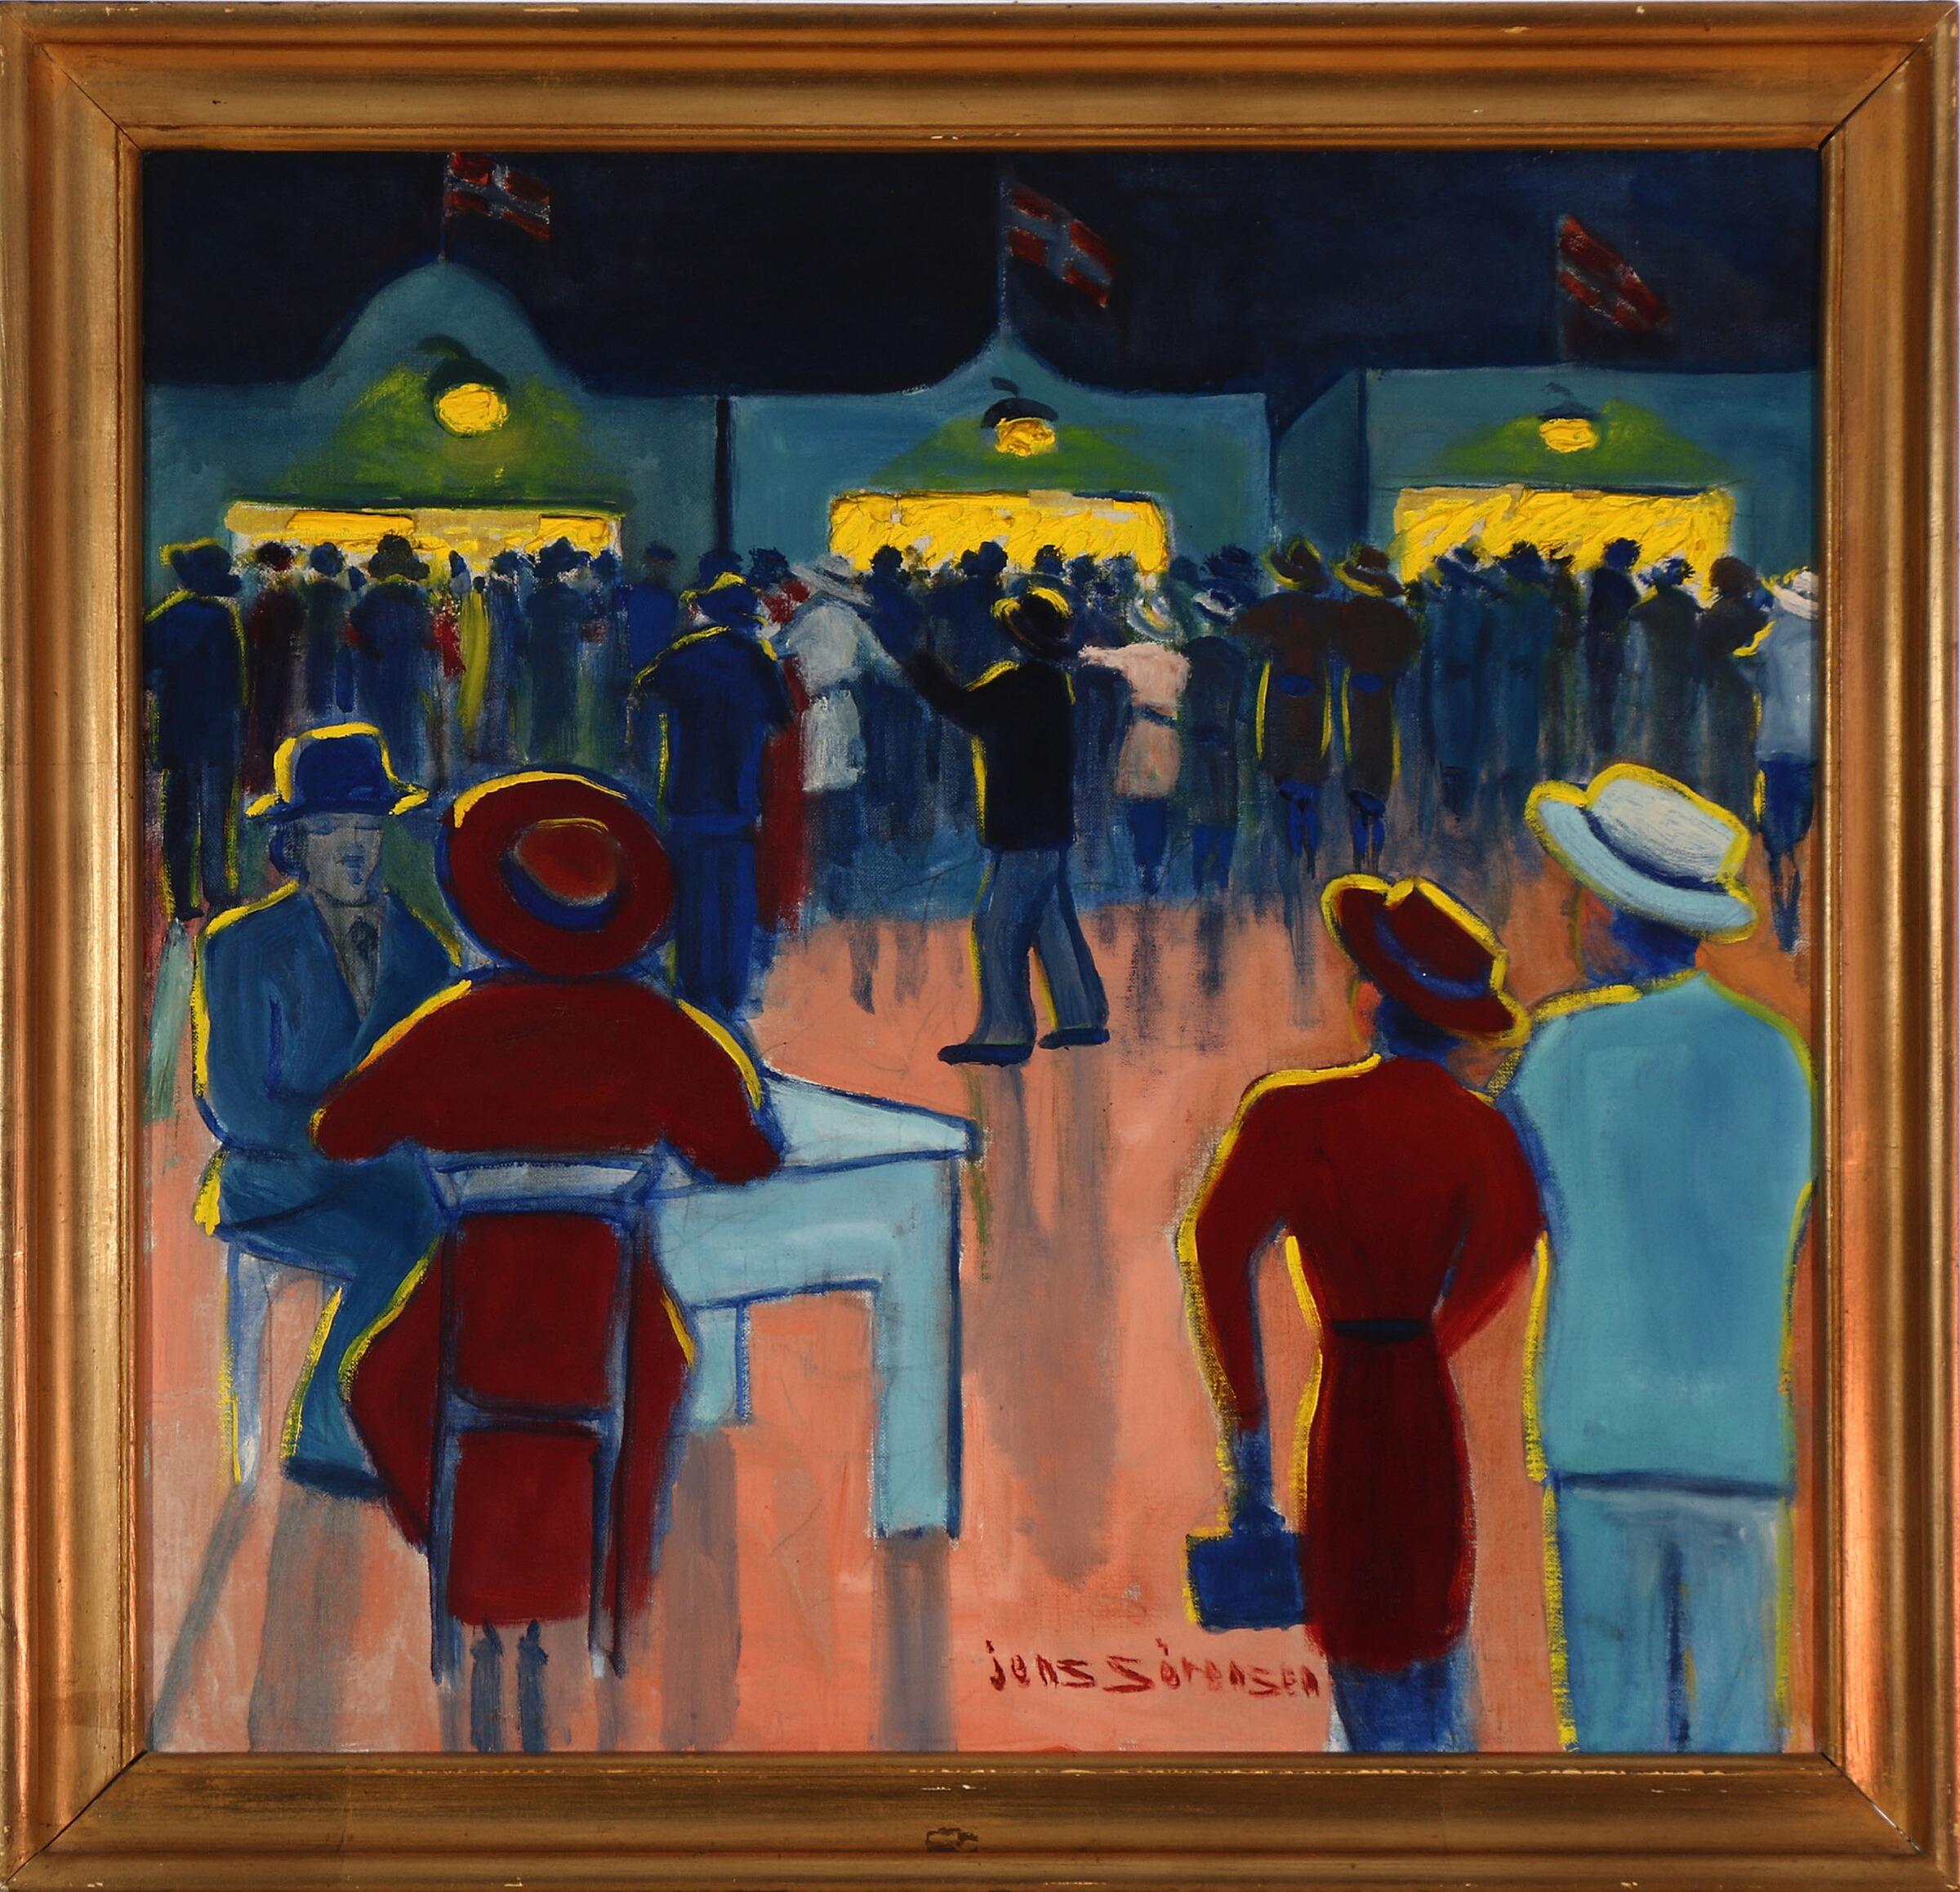 View from Bakken, a revered fun fair park just outside Copenhagen. Signed Jens Sørensen. A night scene. Bakken is a very old and beloved park enjoyed by old and young still open today. This painting captures the crowds on an evening in 1940s. Oil on